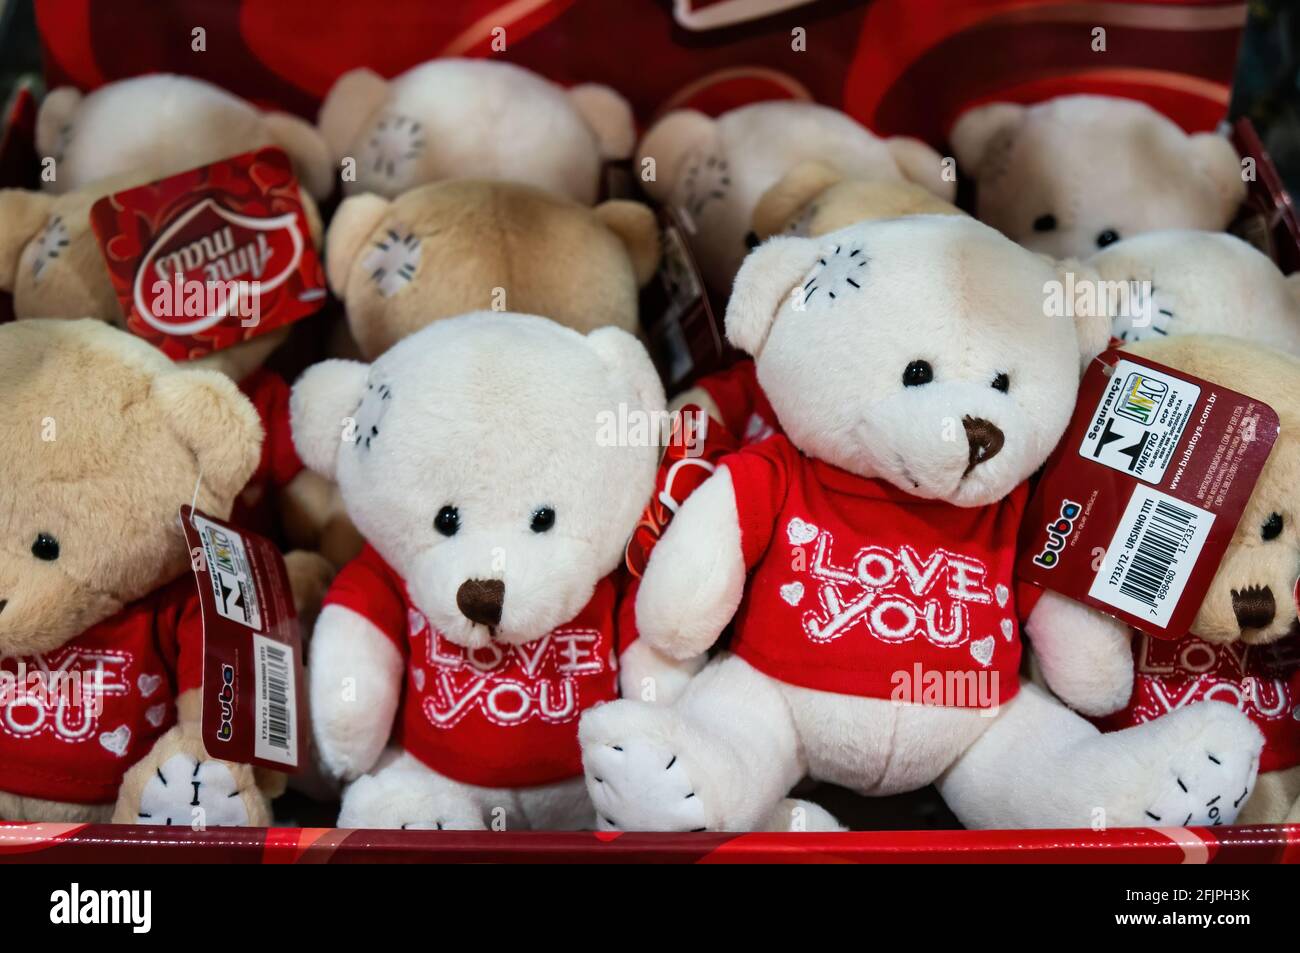 A shelf full of bear plushies wearing red shirts with 'Love You' message inside the gift and souvenir shop of Sao Paulo aquarium. Stock Photo